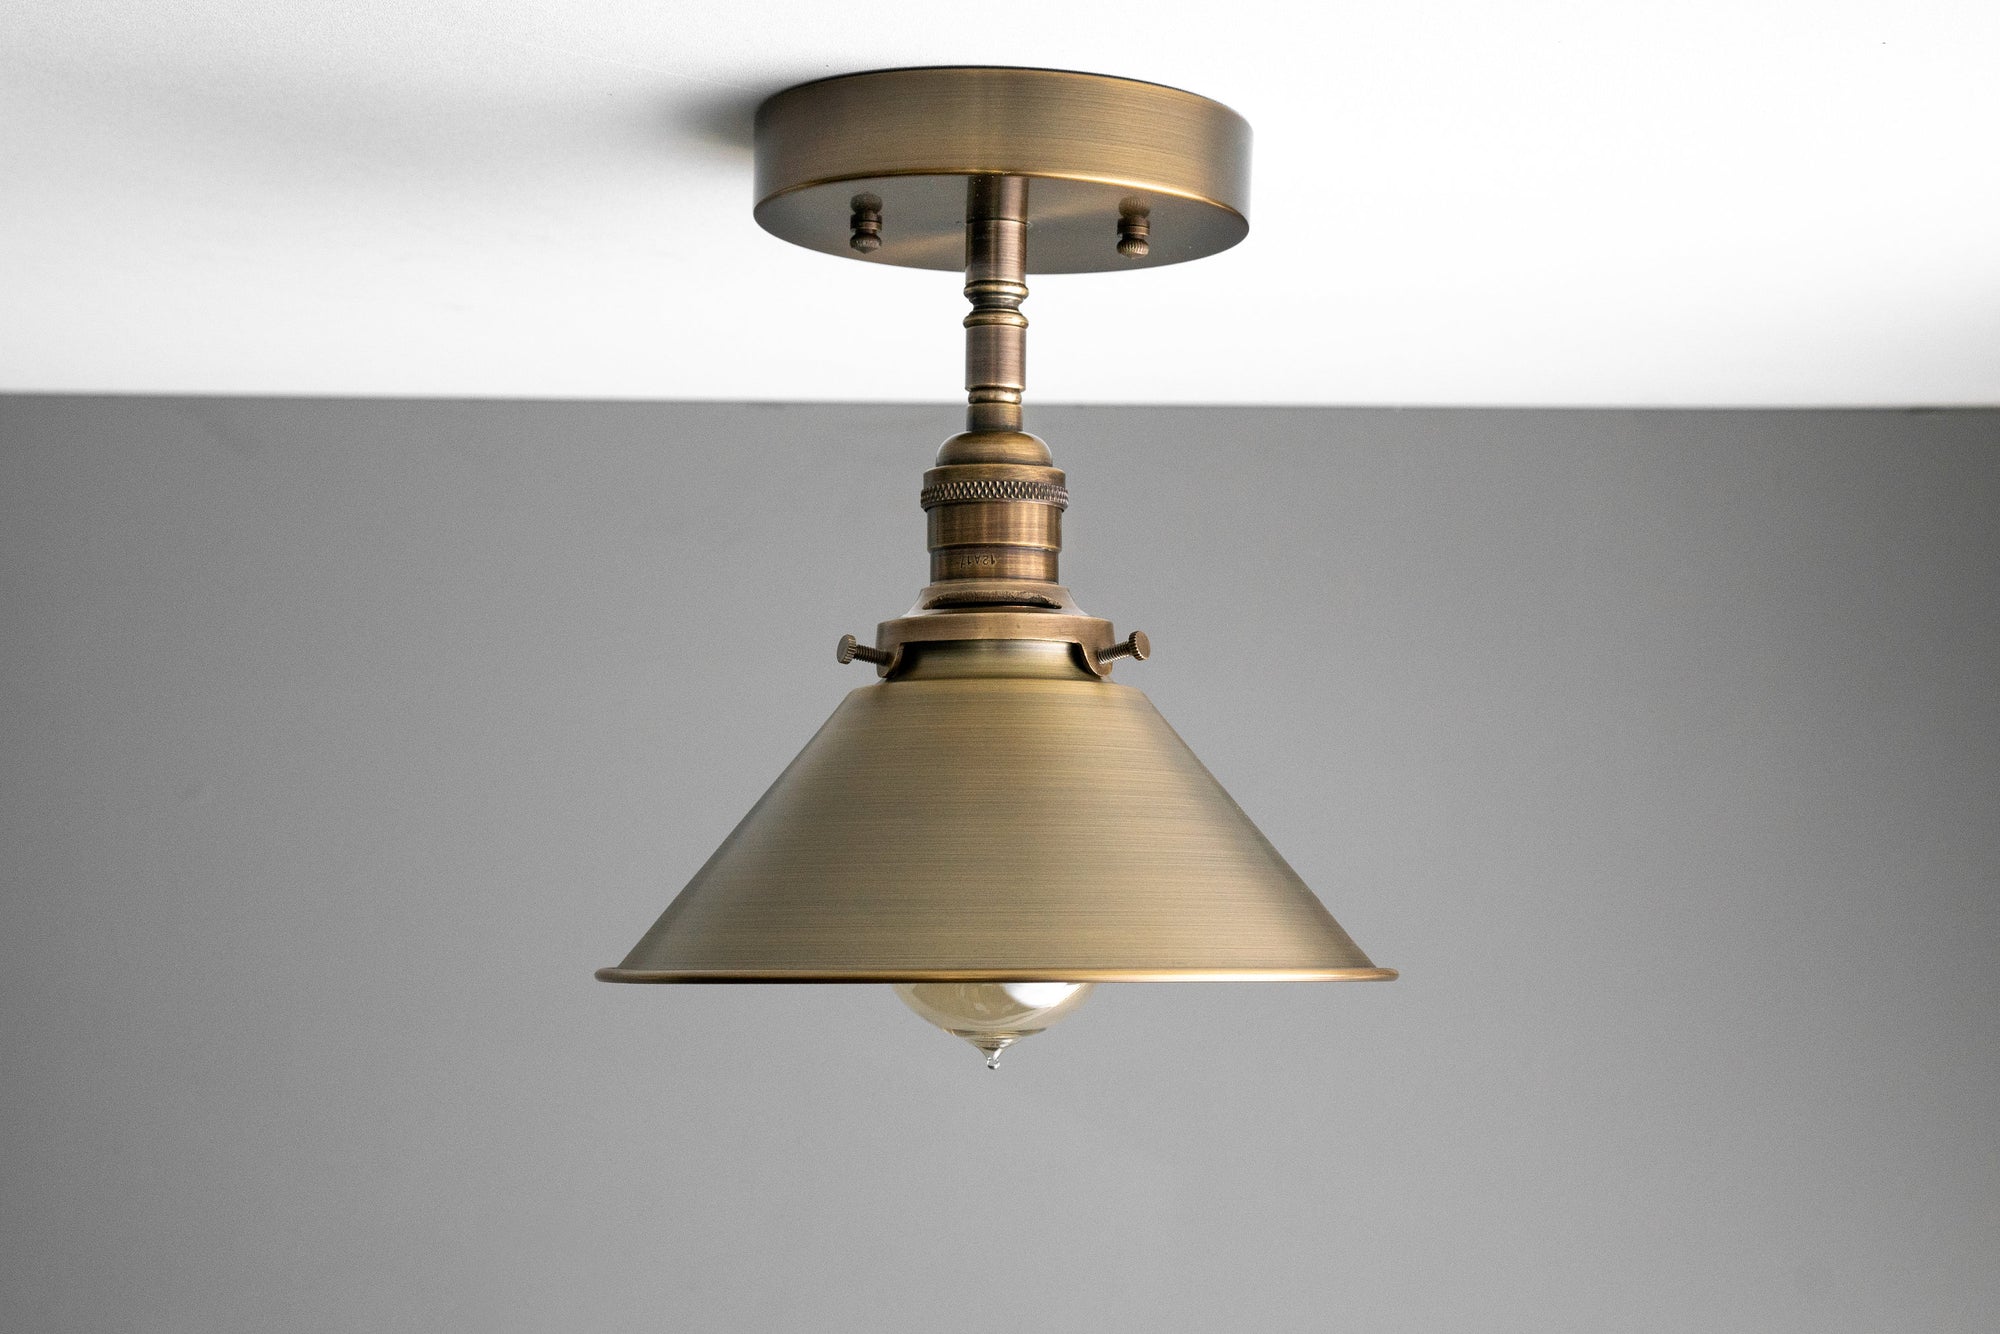 CEILING LIGHT MODEL No. 1432 - Peared Creation